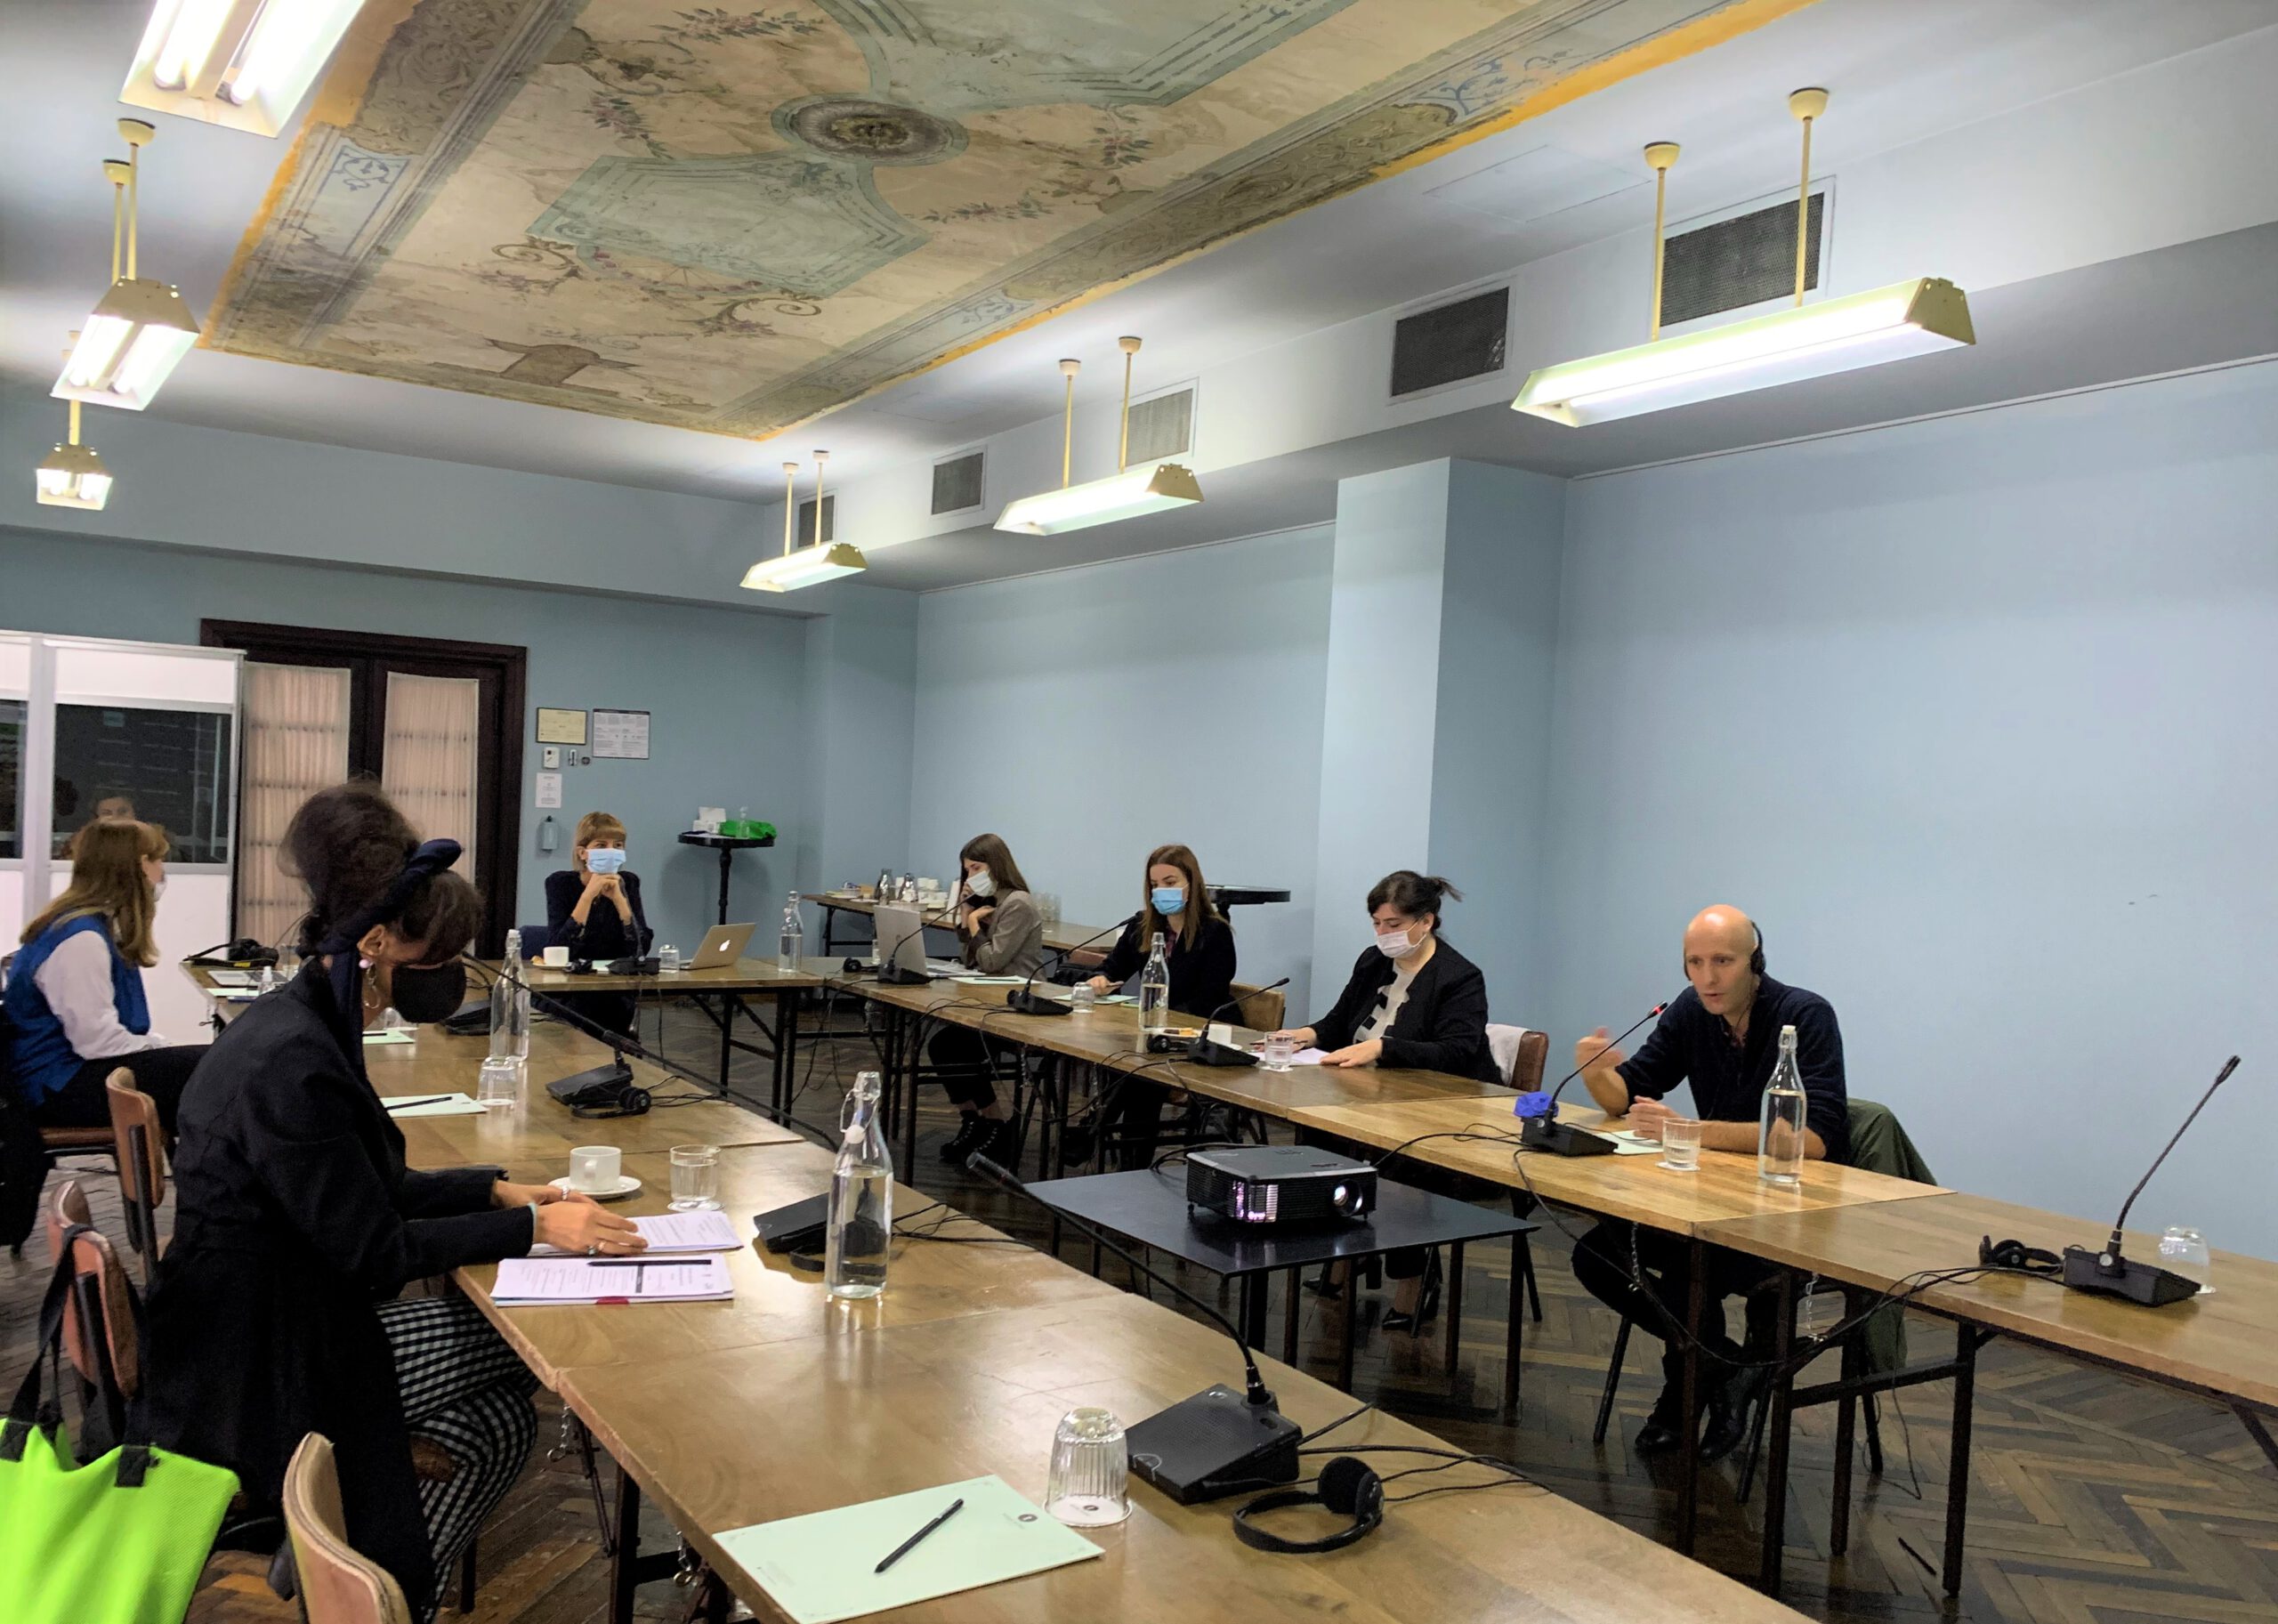 The EU-supported Georgia Climate Action Program and CENN Host the First Meeting of the National Climate Platform (NCP)